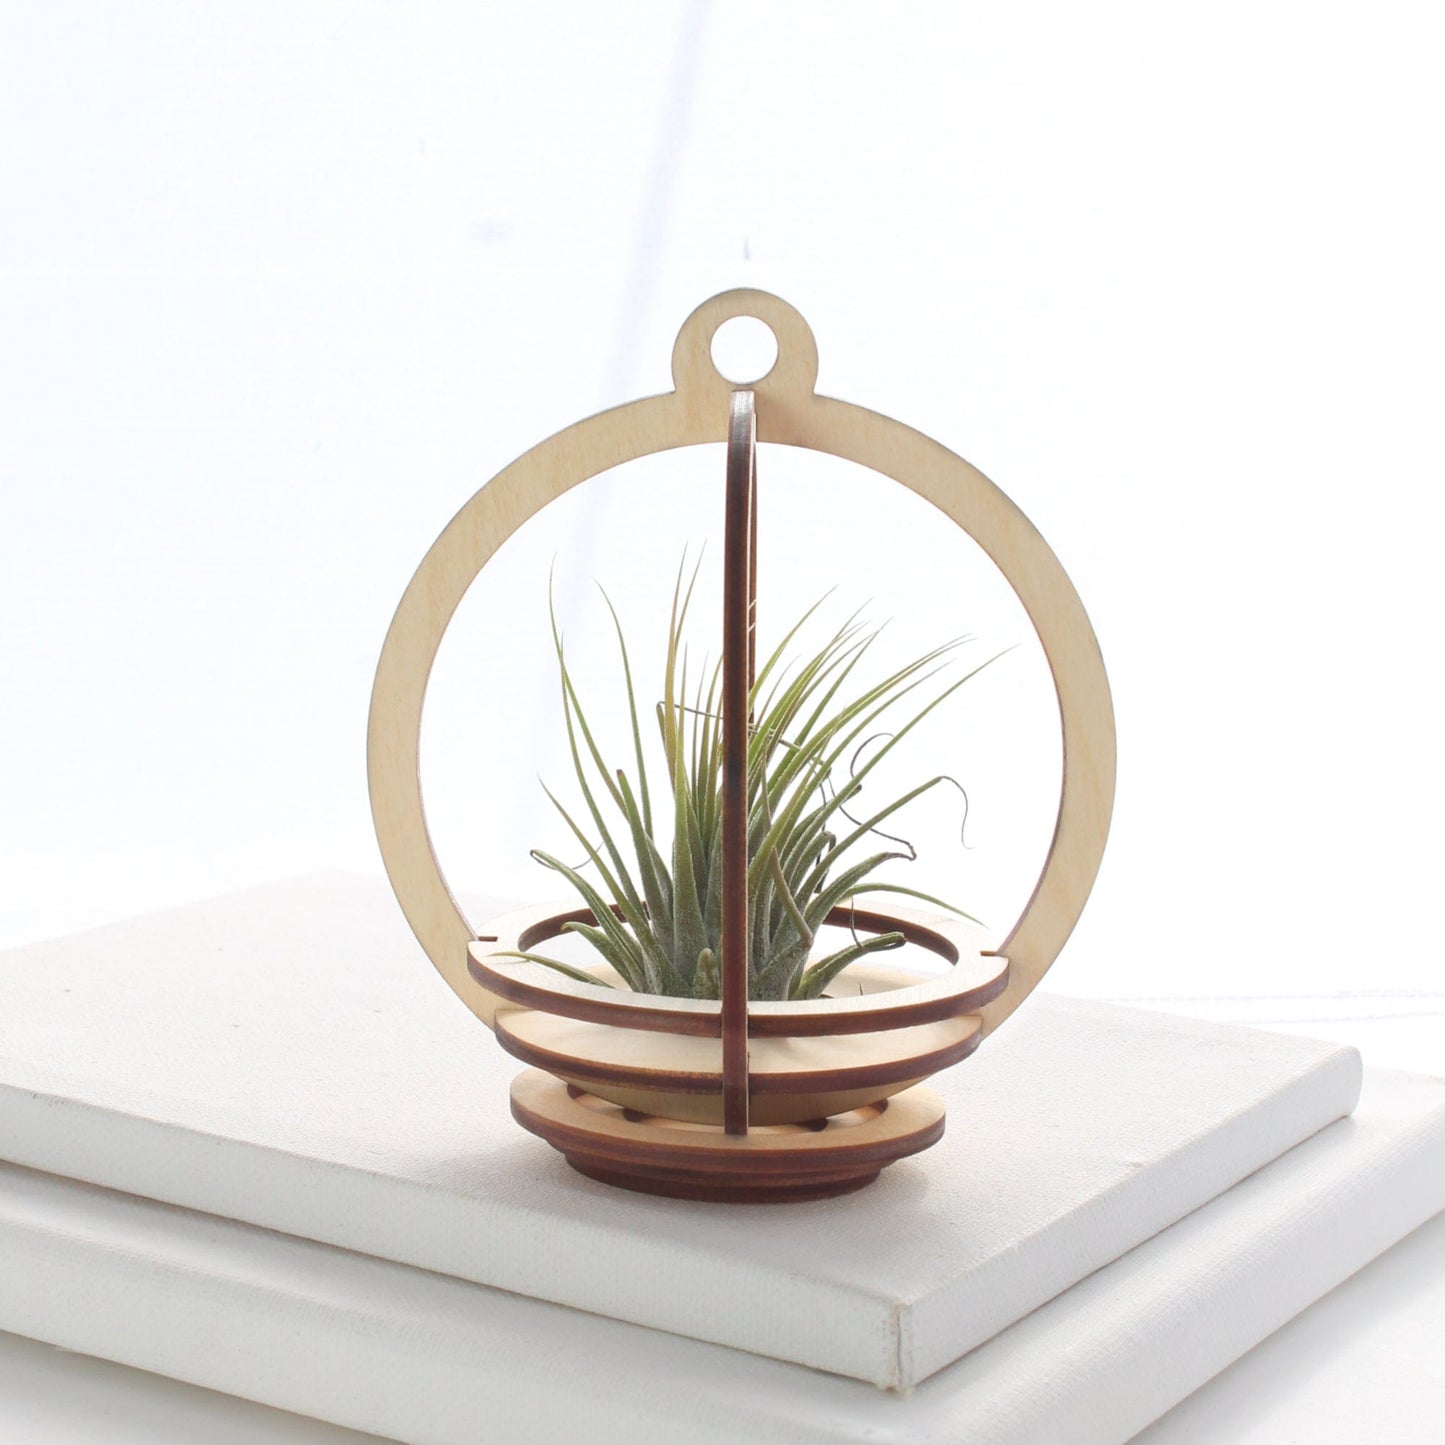 GIFT Small Orbit Air Plant holder with Base and Plant